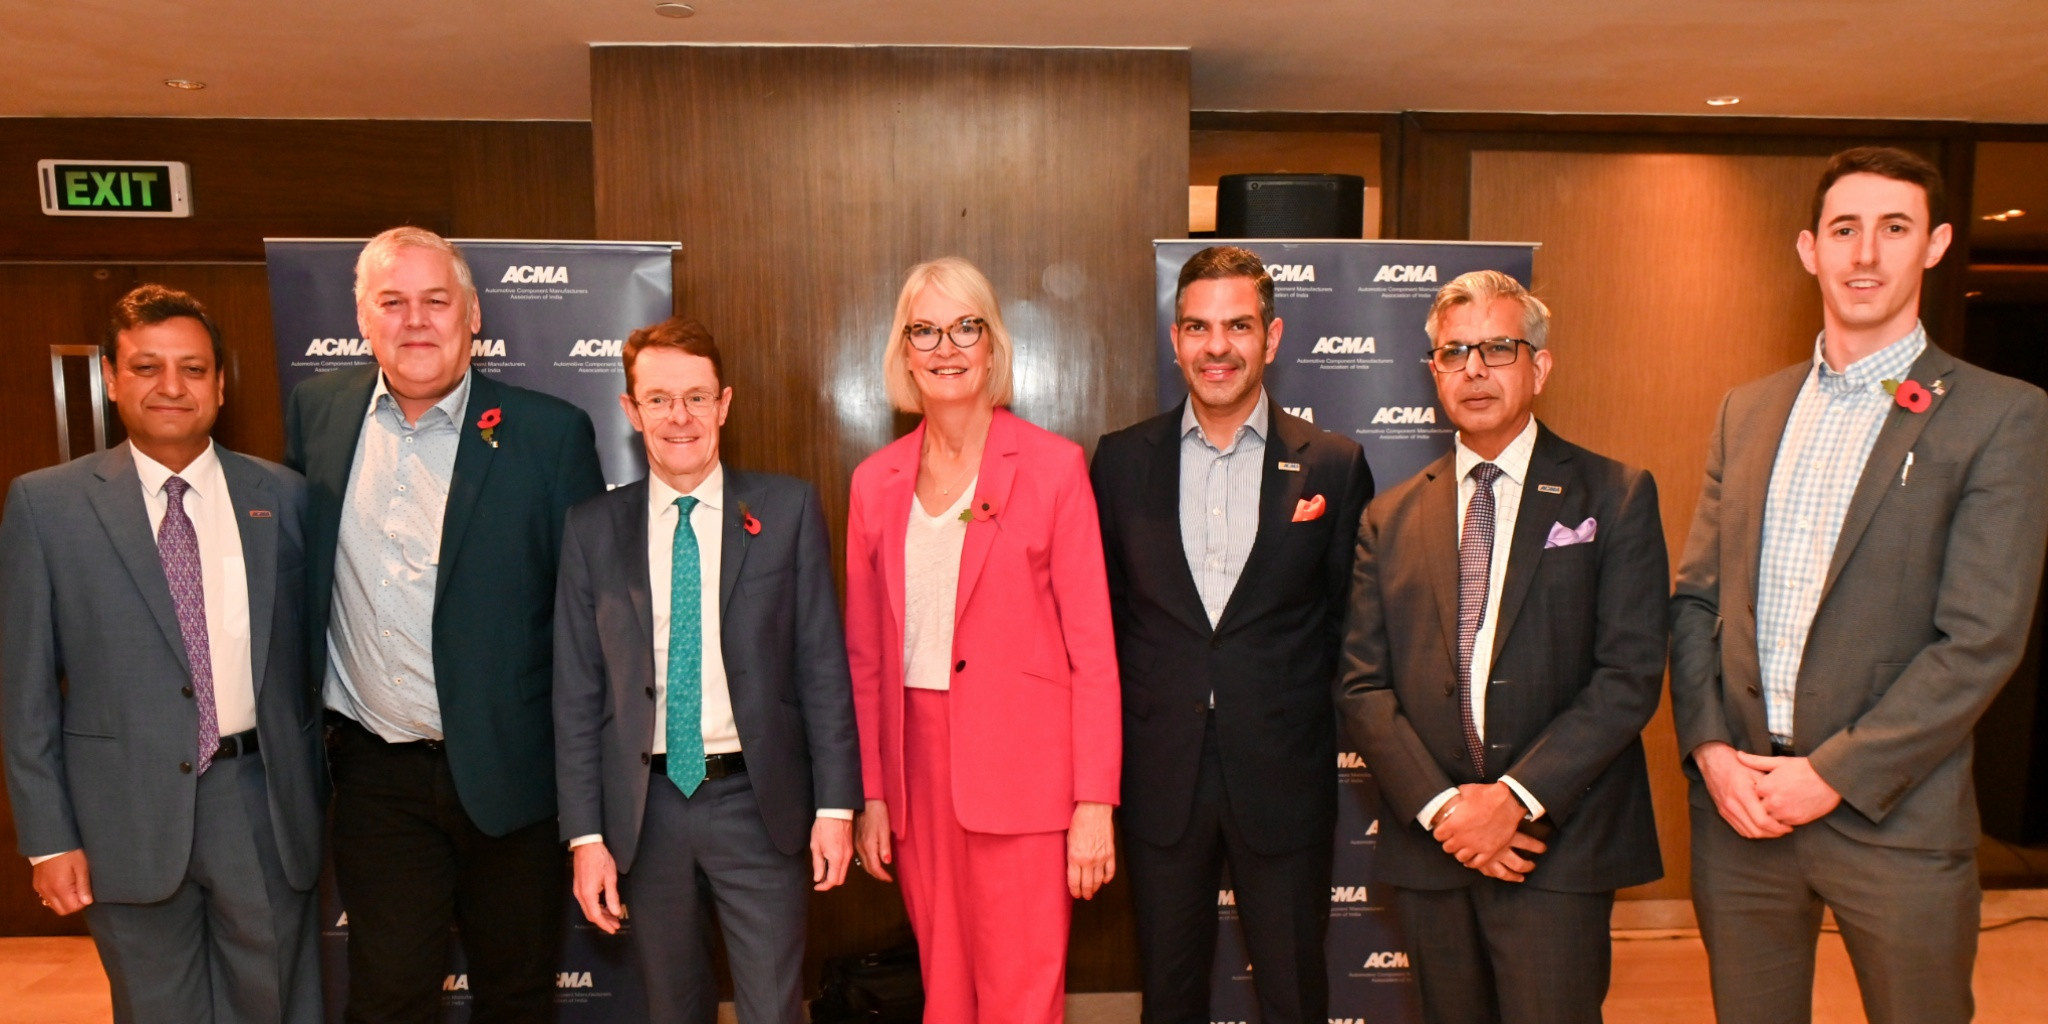 West Midlands Mayor Andy Street continues Birmingham 2022 legacy with India visit